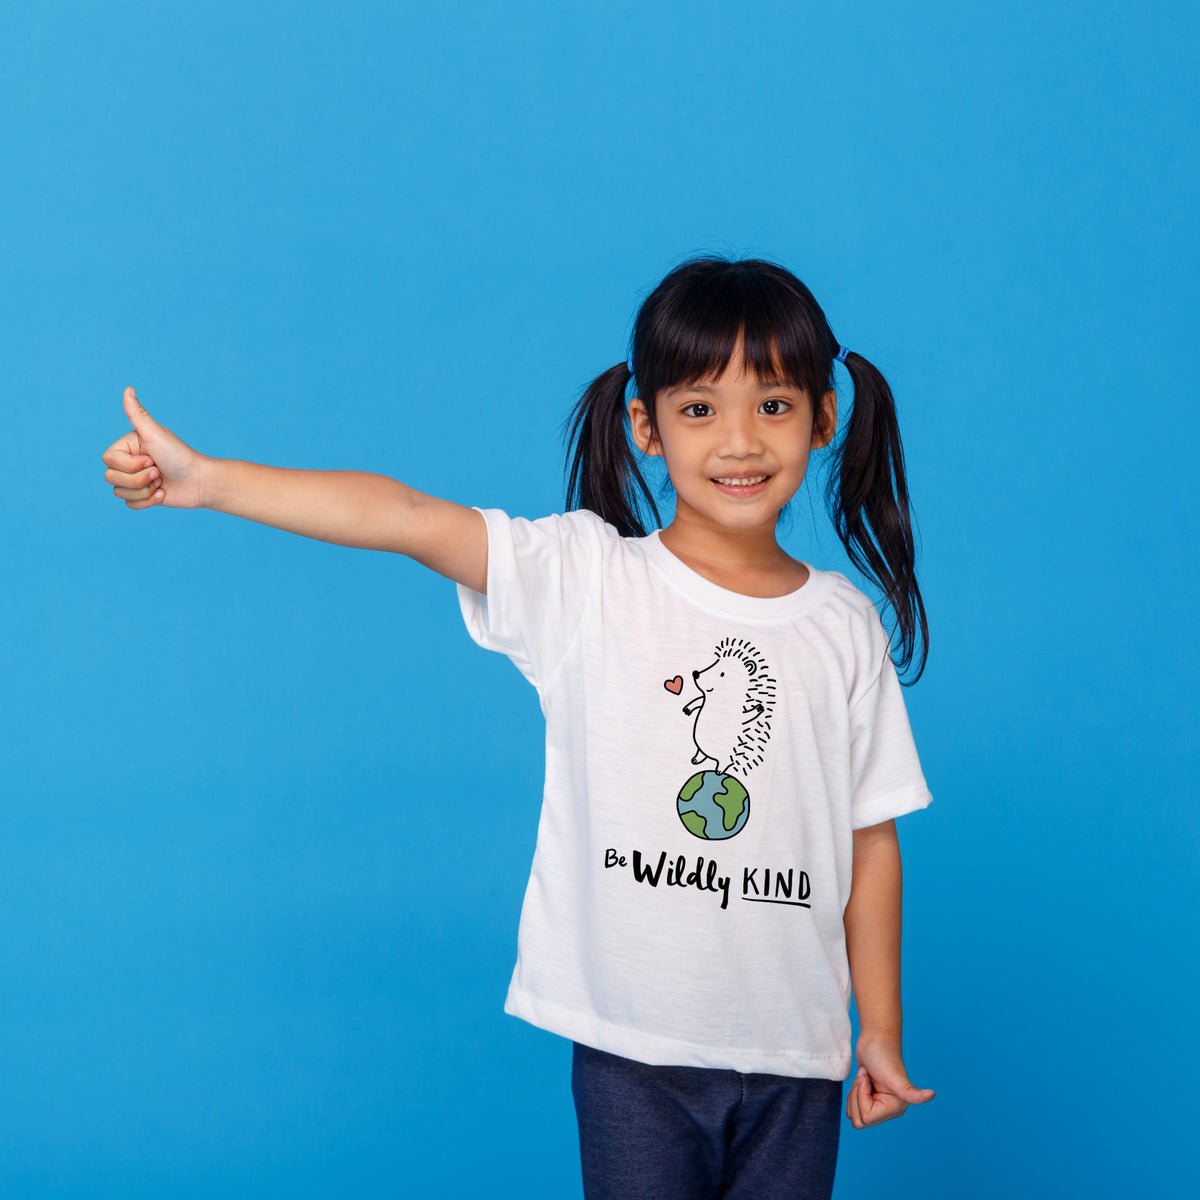 Wildly Tasty Gifts - Kids T-shirts